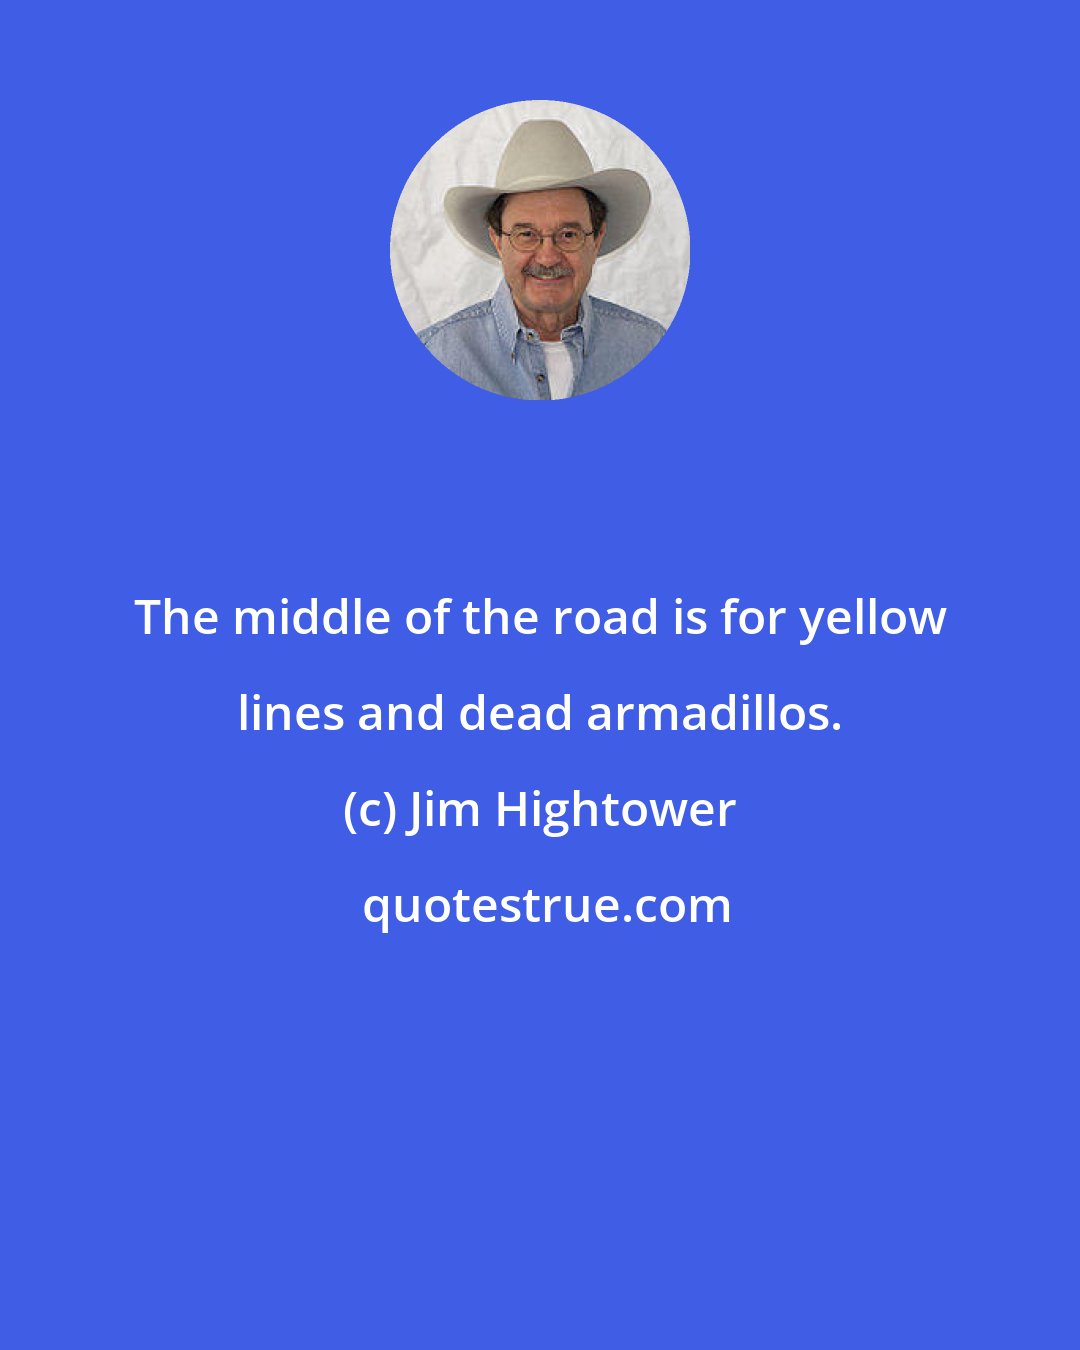 Jim Hightower: The middle of the road is for yellow lines and dead armadillos.